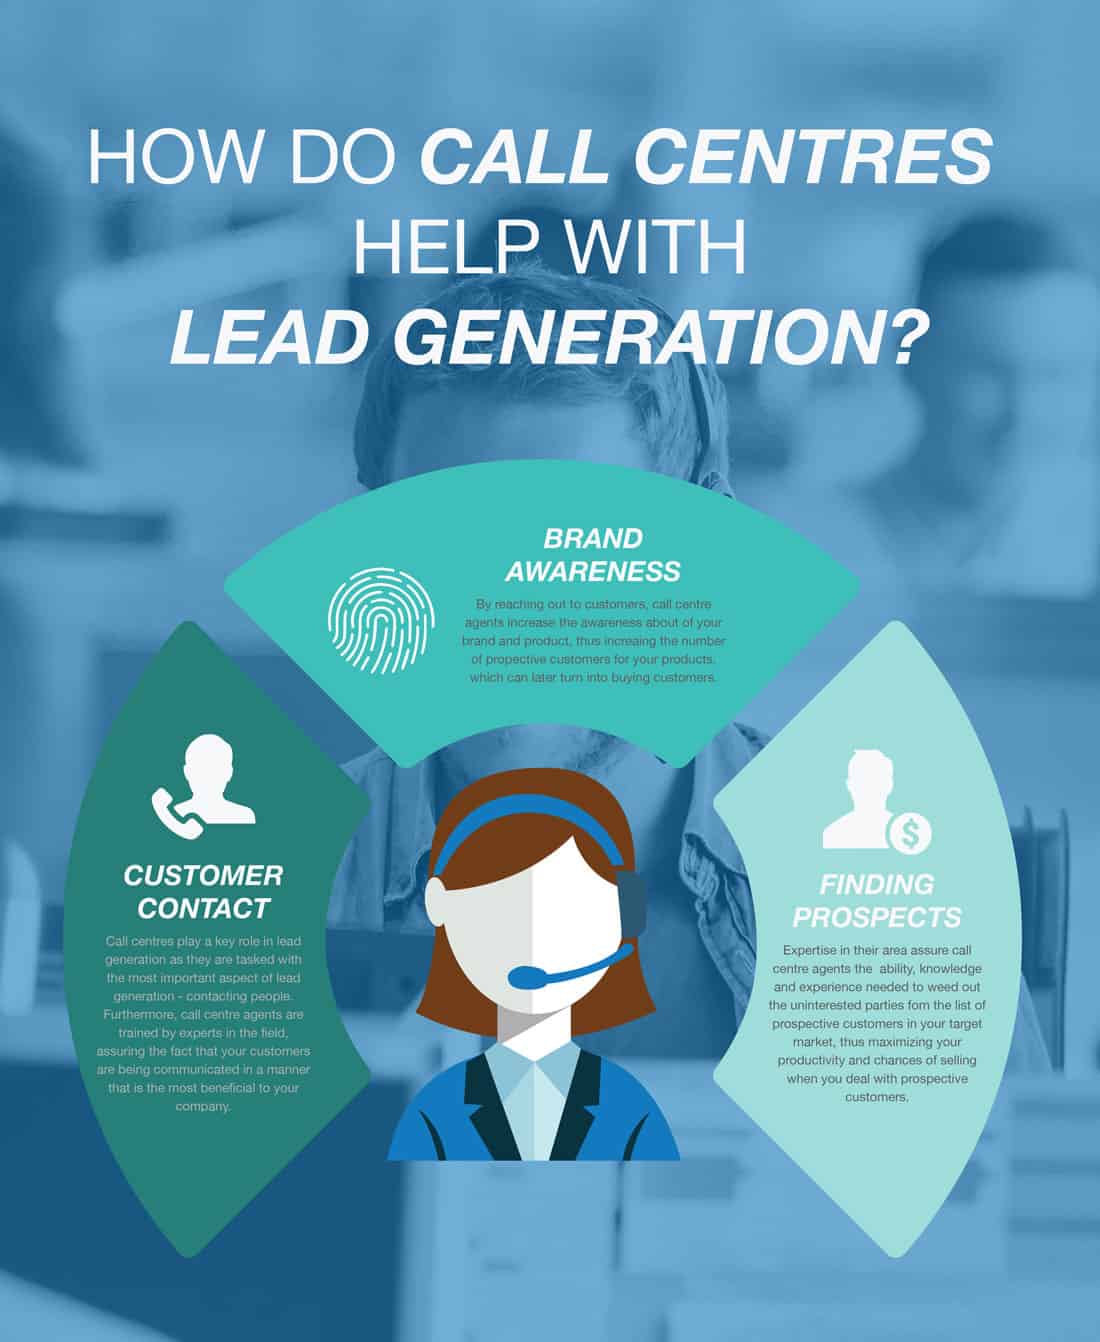 How Do Call Centres Help with Lead Generation?